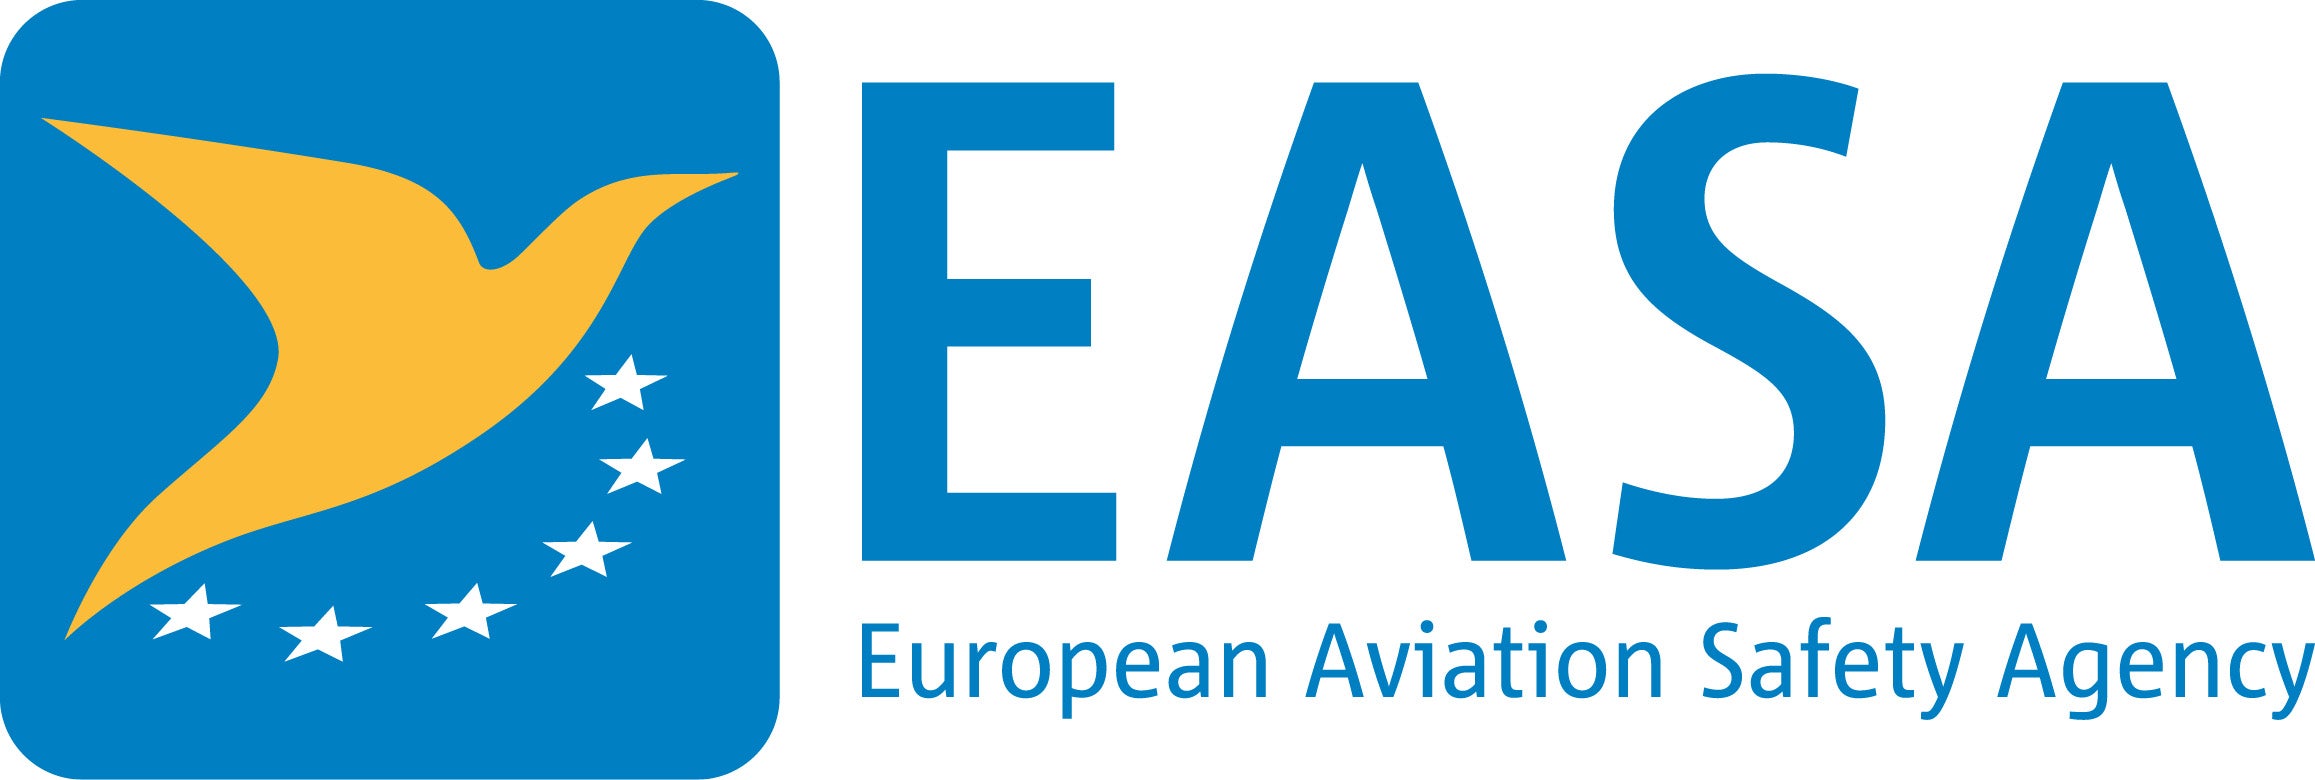 European Union and Chinese Government Form Aviation Partnership